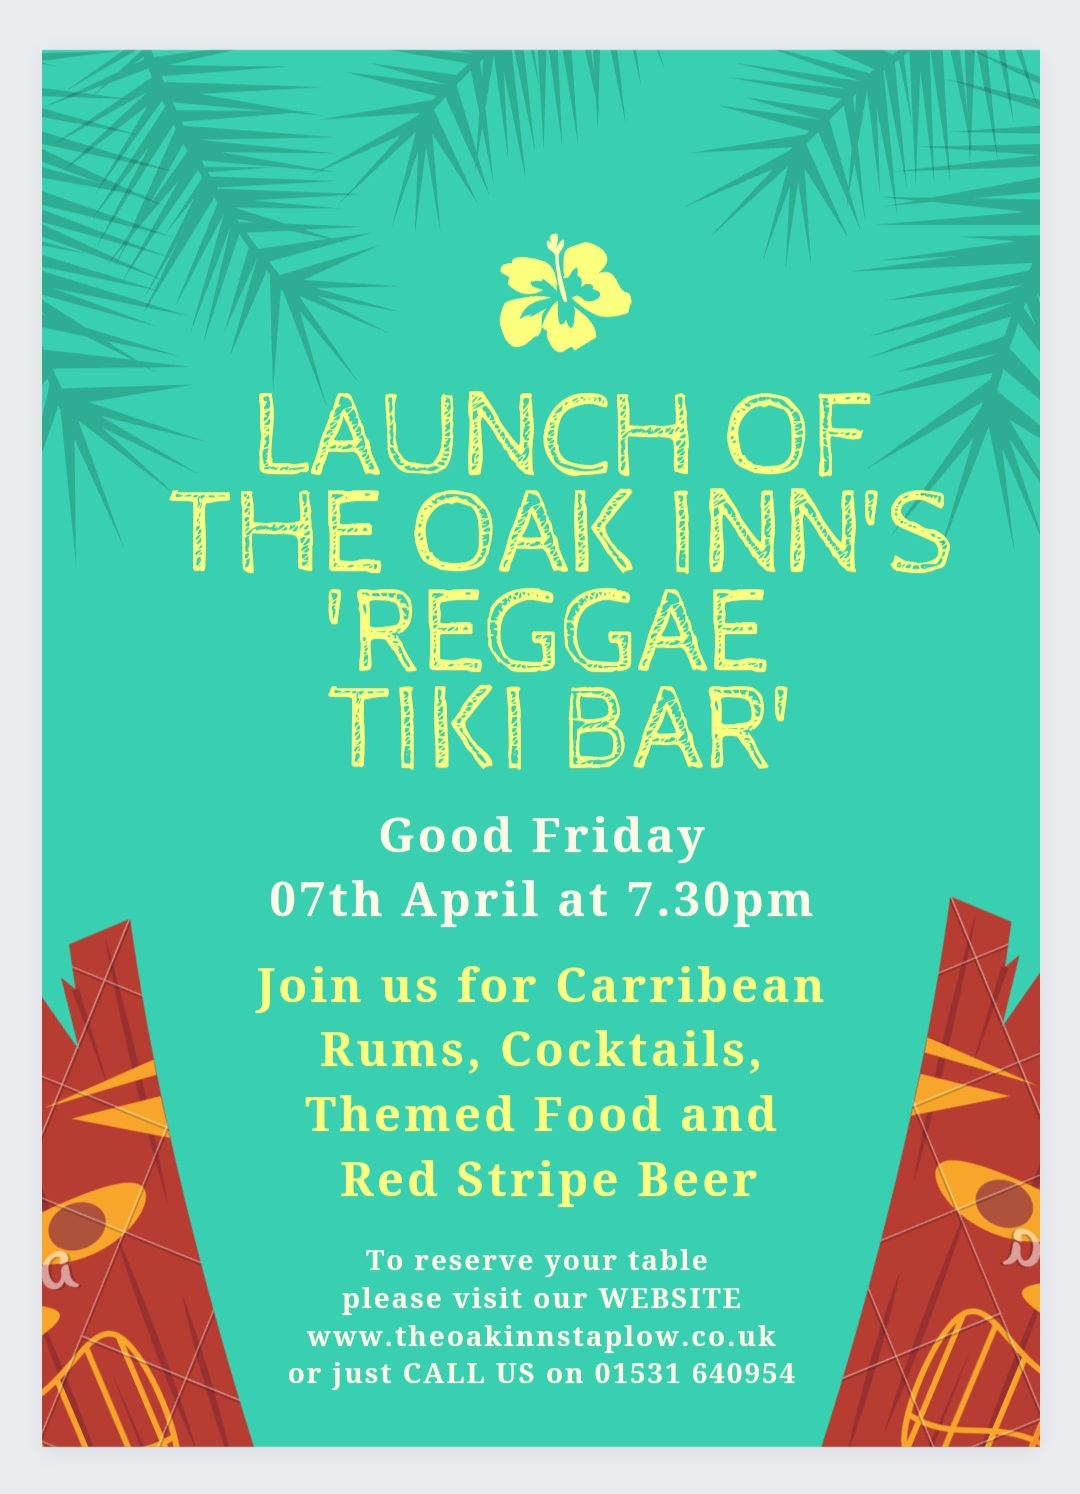 Tiki bar launch event poster